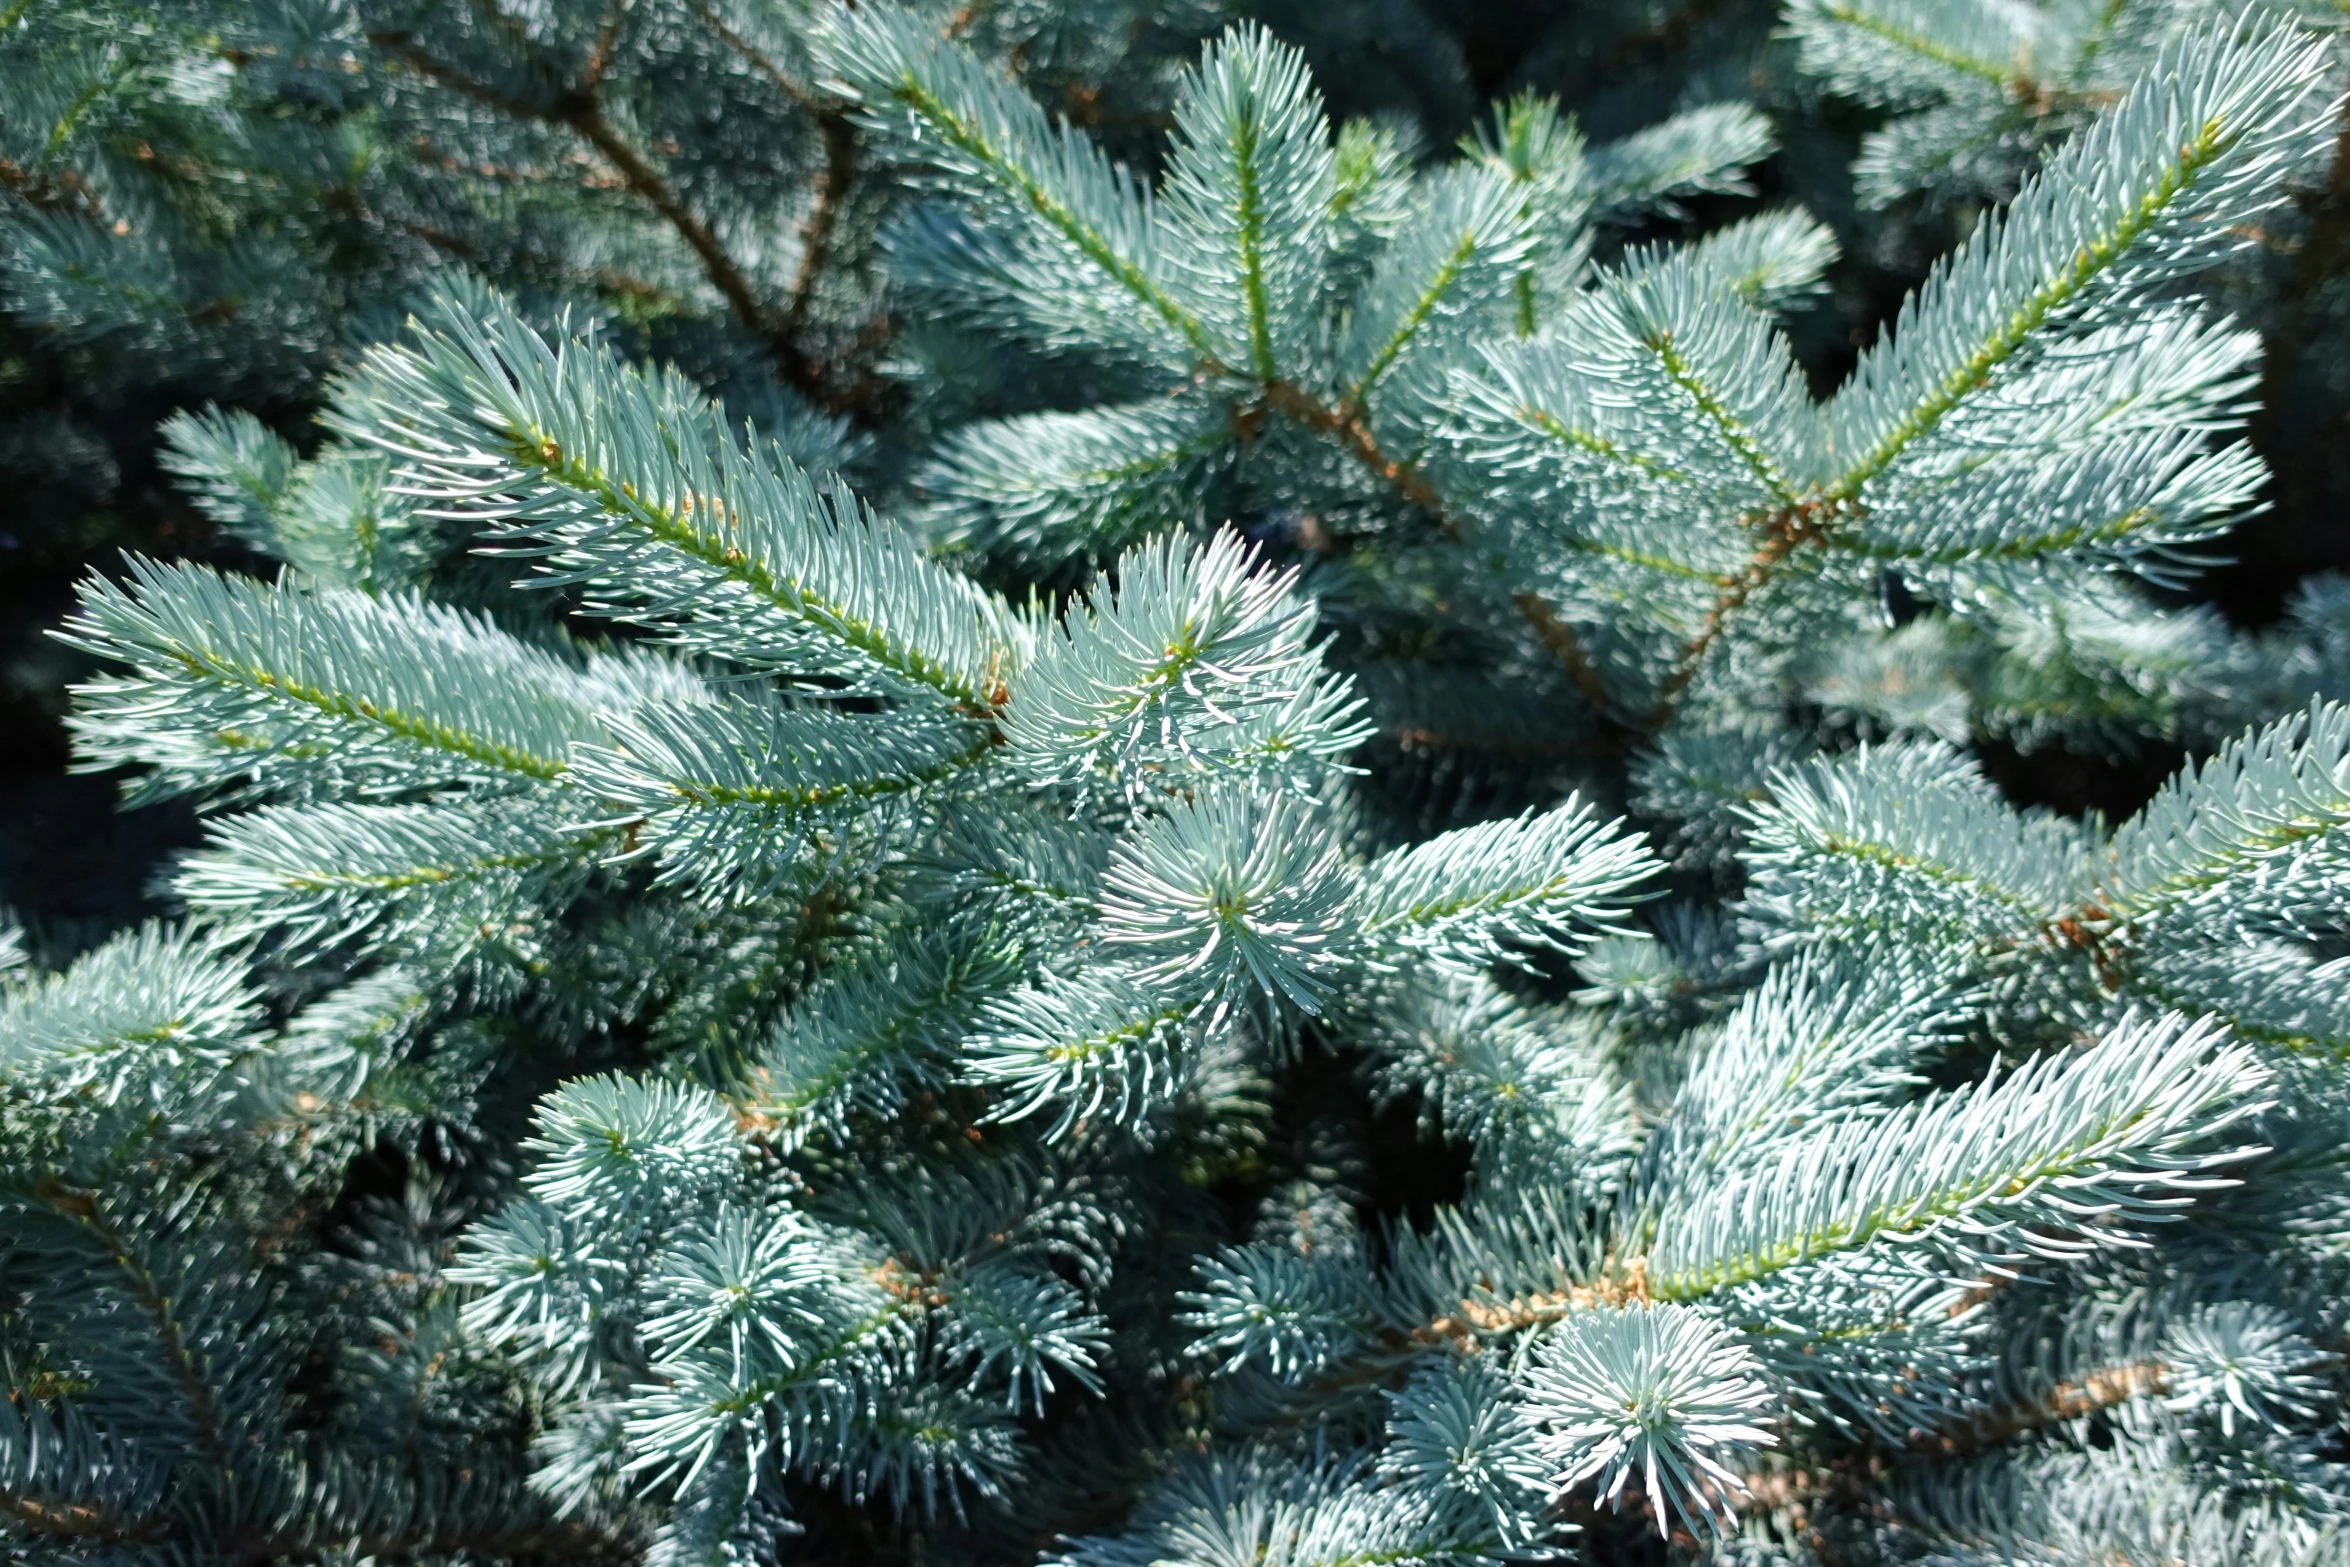 the frond of evergreen needles is covered by frost